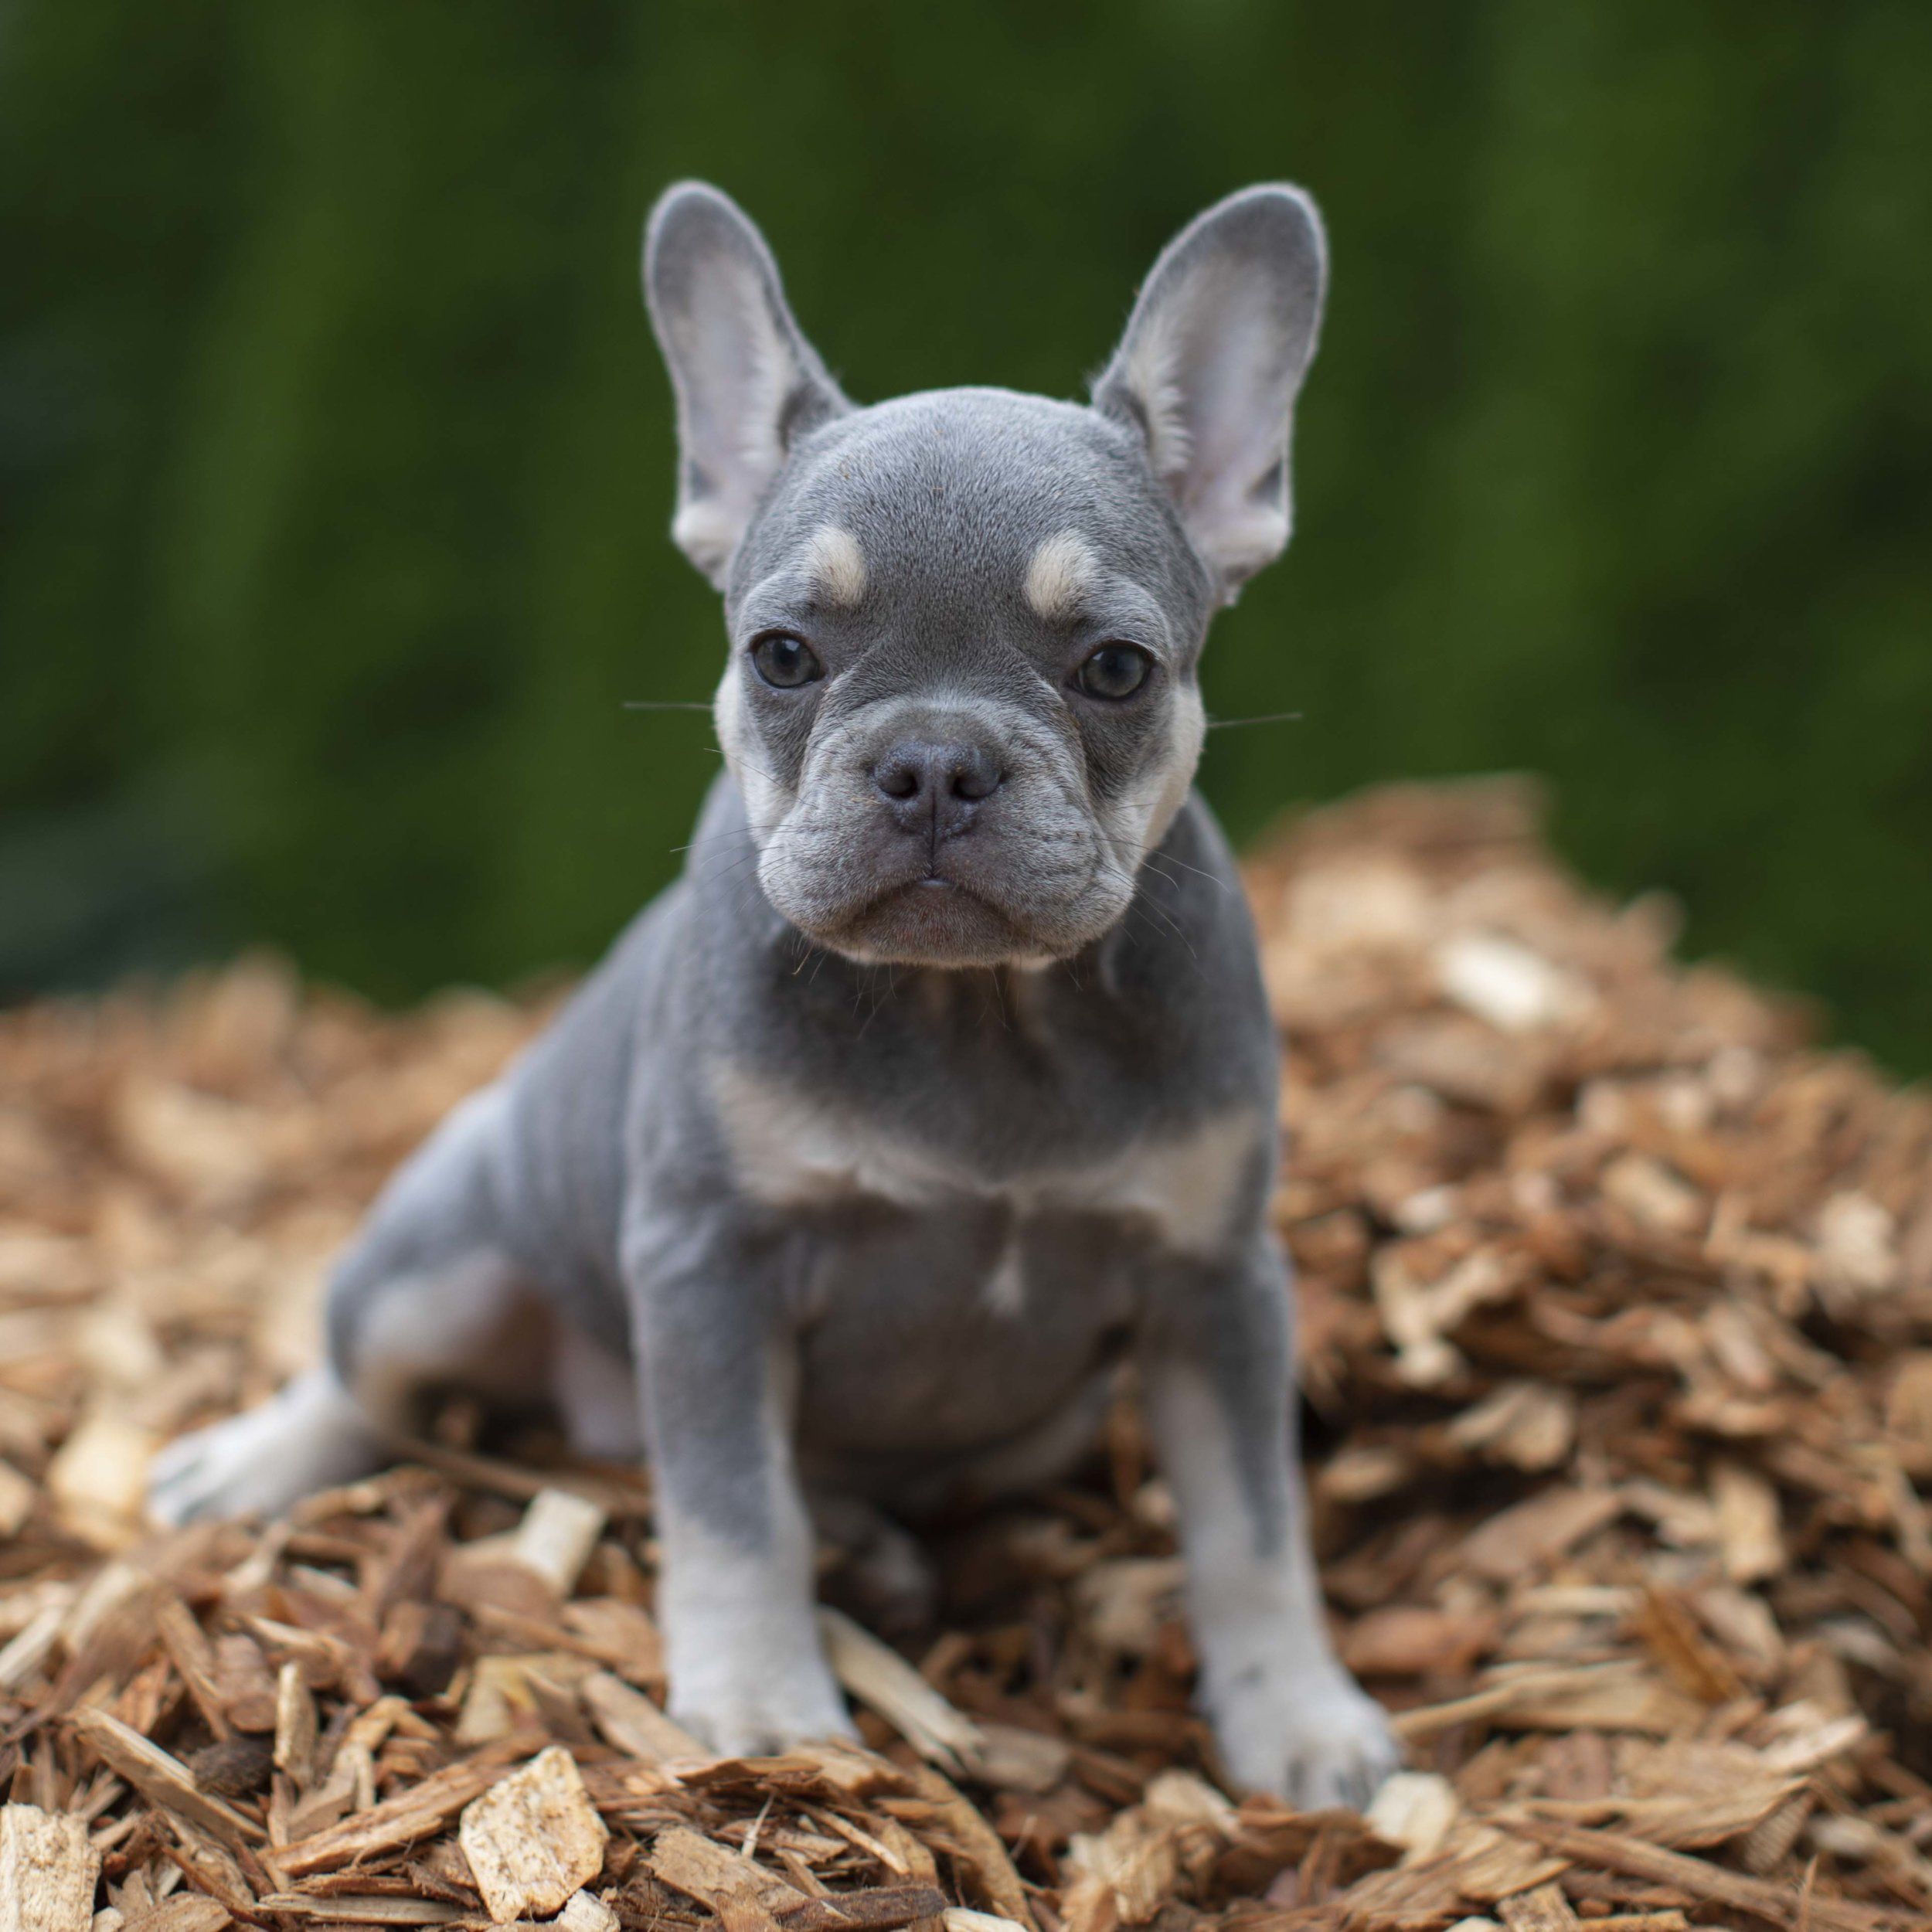 Lilac French Bulldogs: What to Know About This Unusual Coat Color